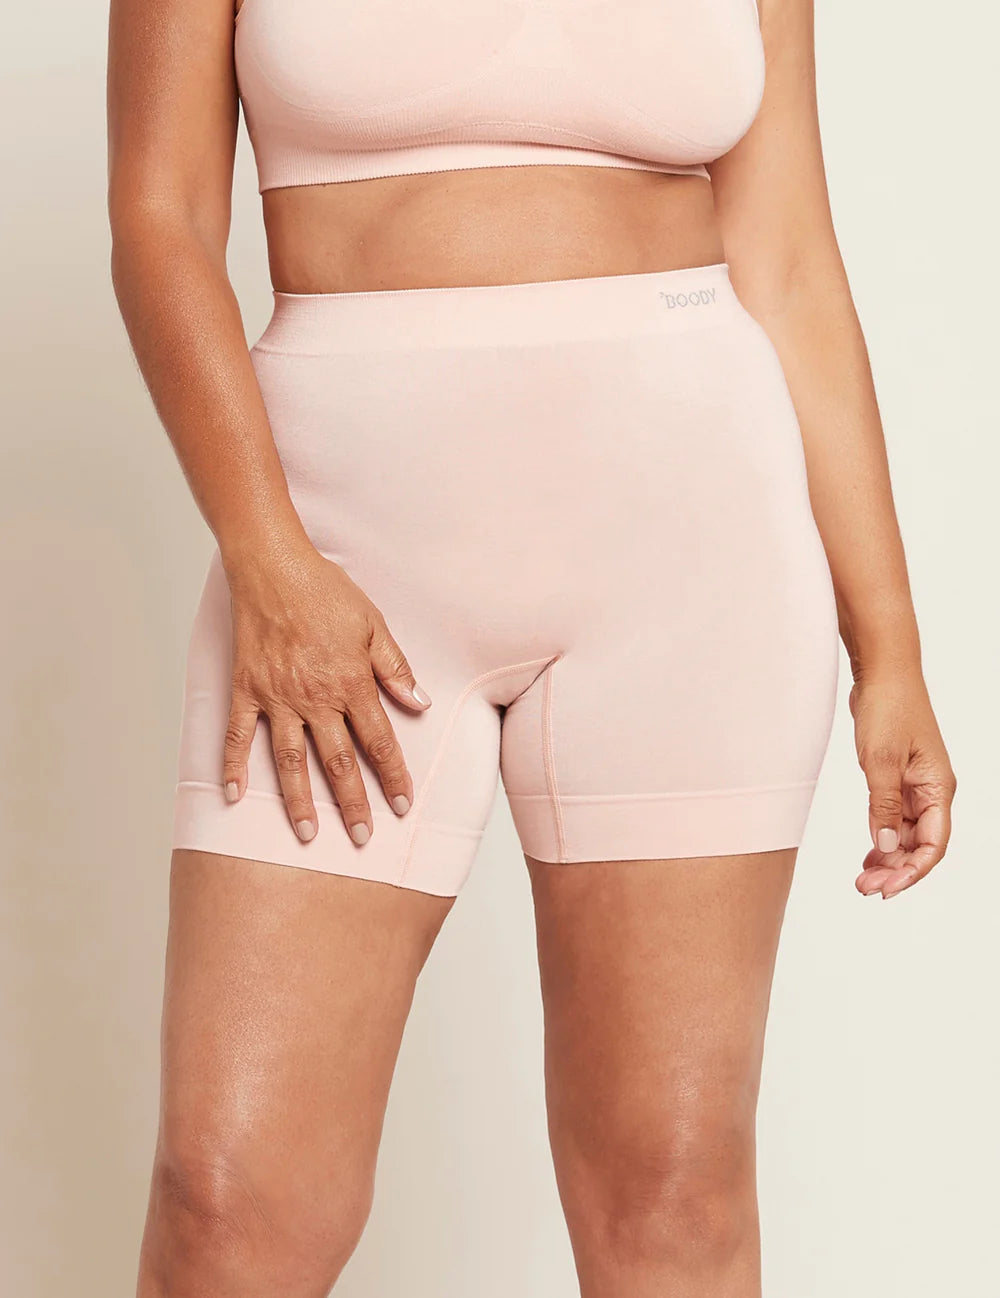 Boody Smoothing Shorts - Nude